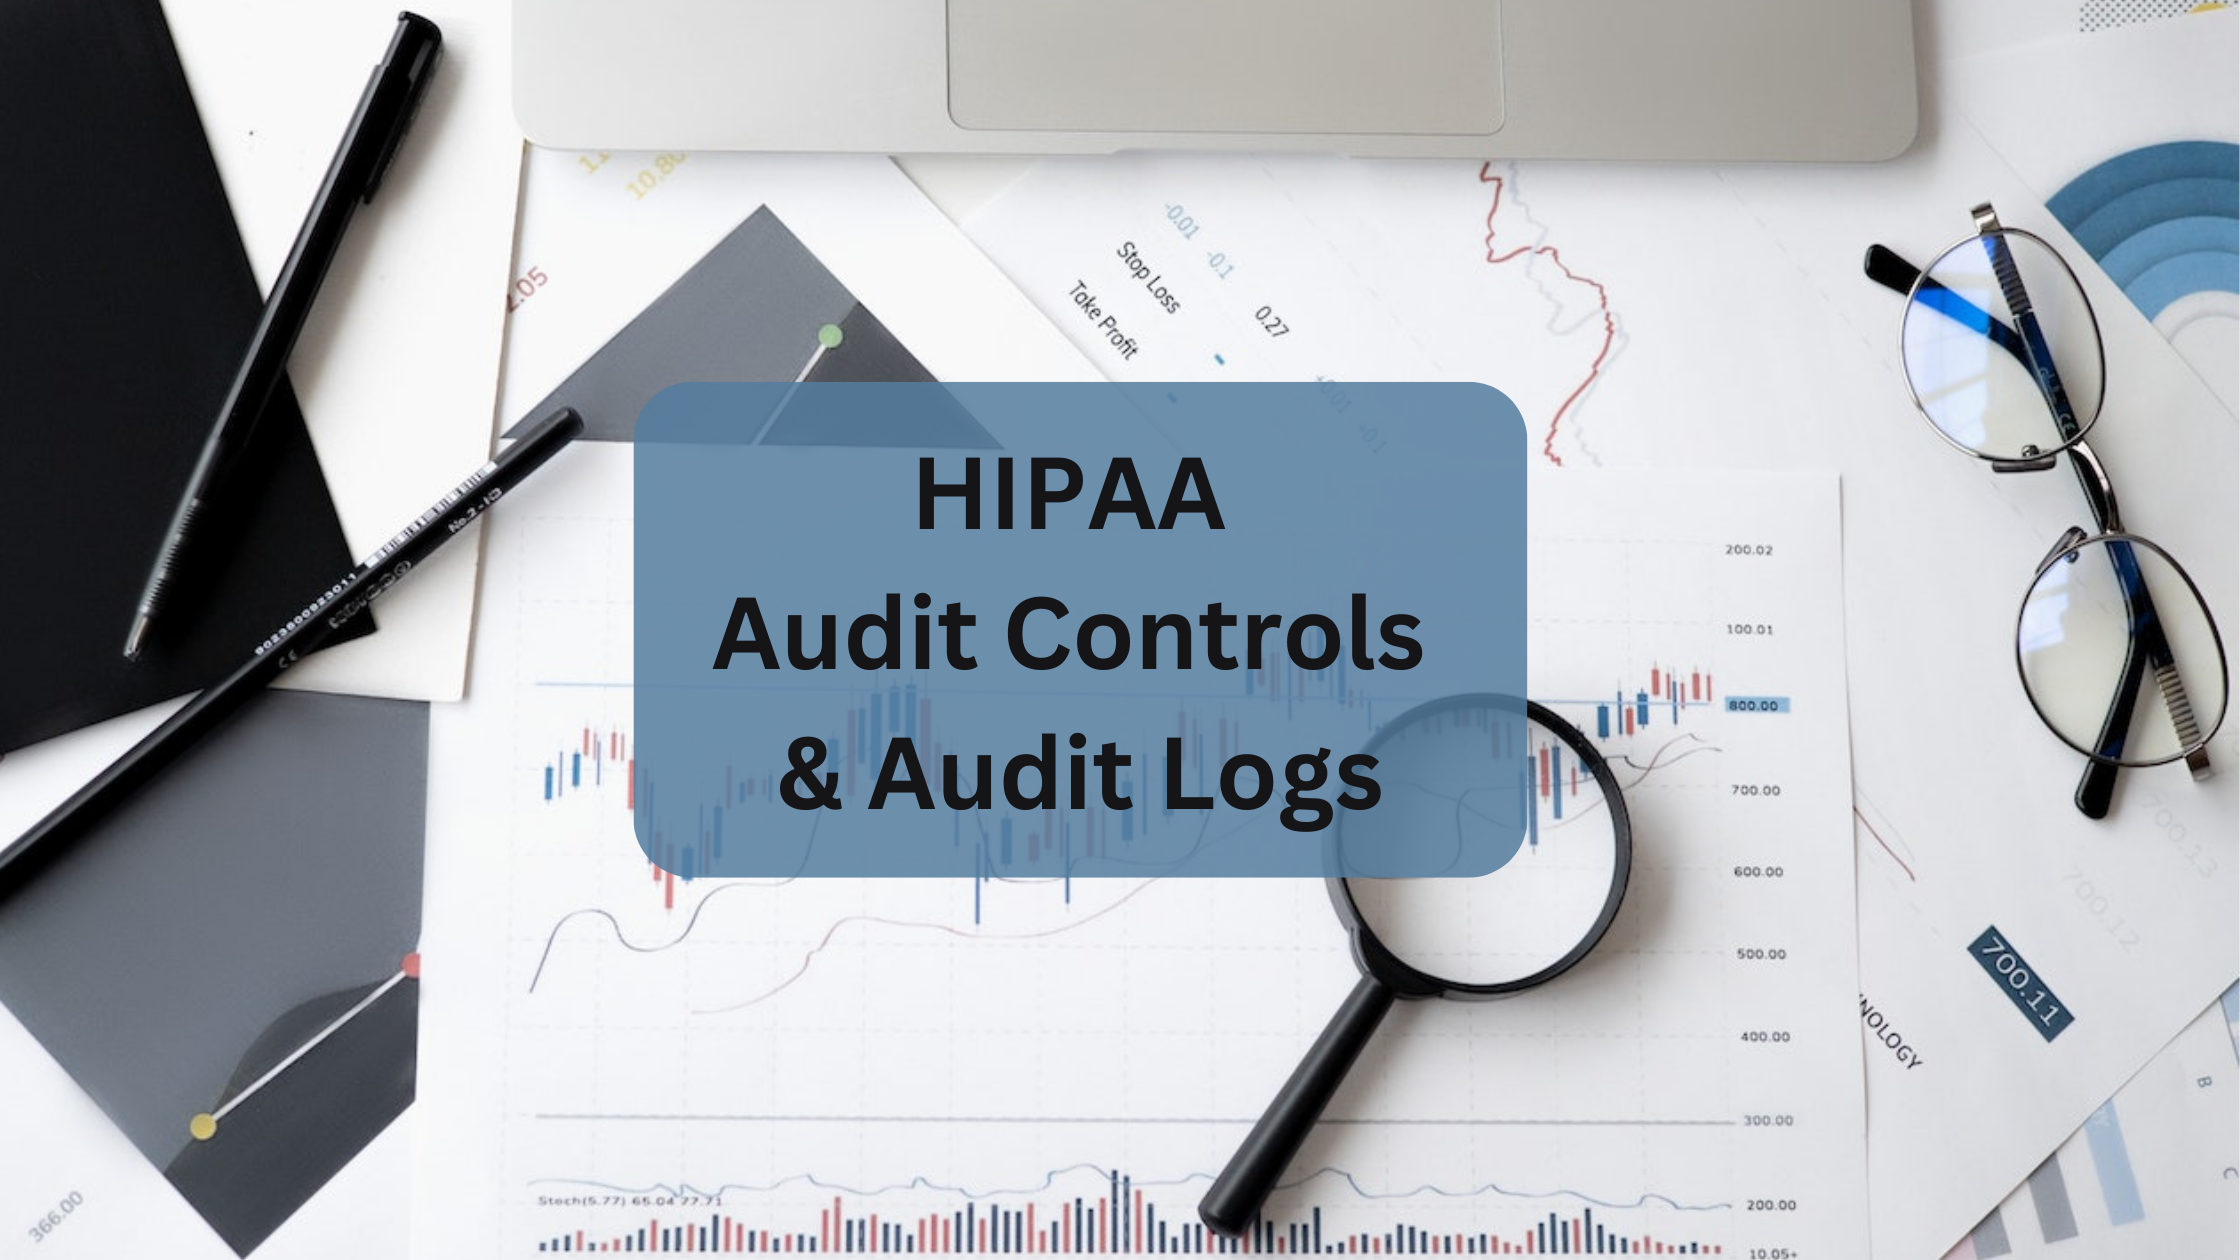 HIPAA Security Audit Controls and Audit Logs